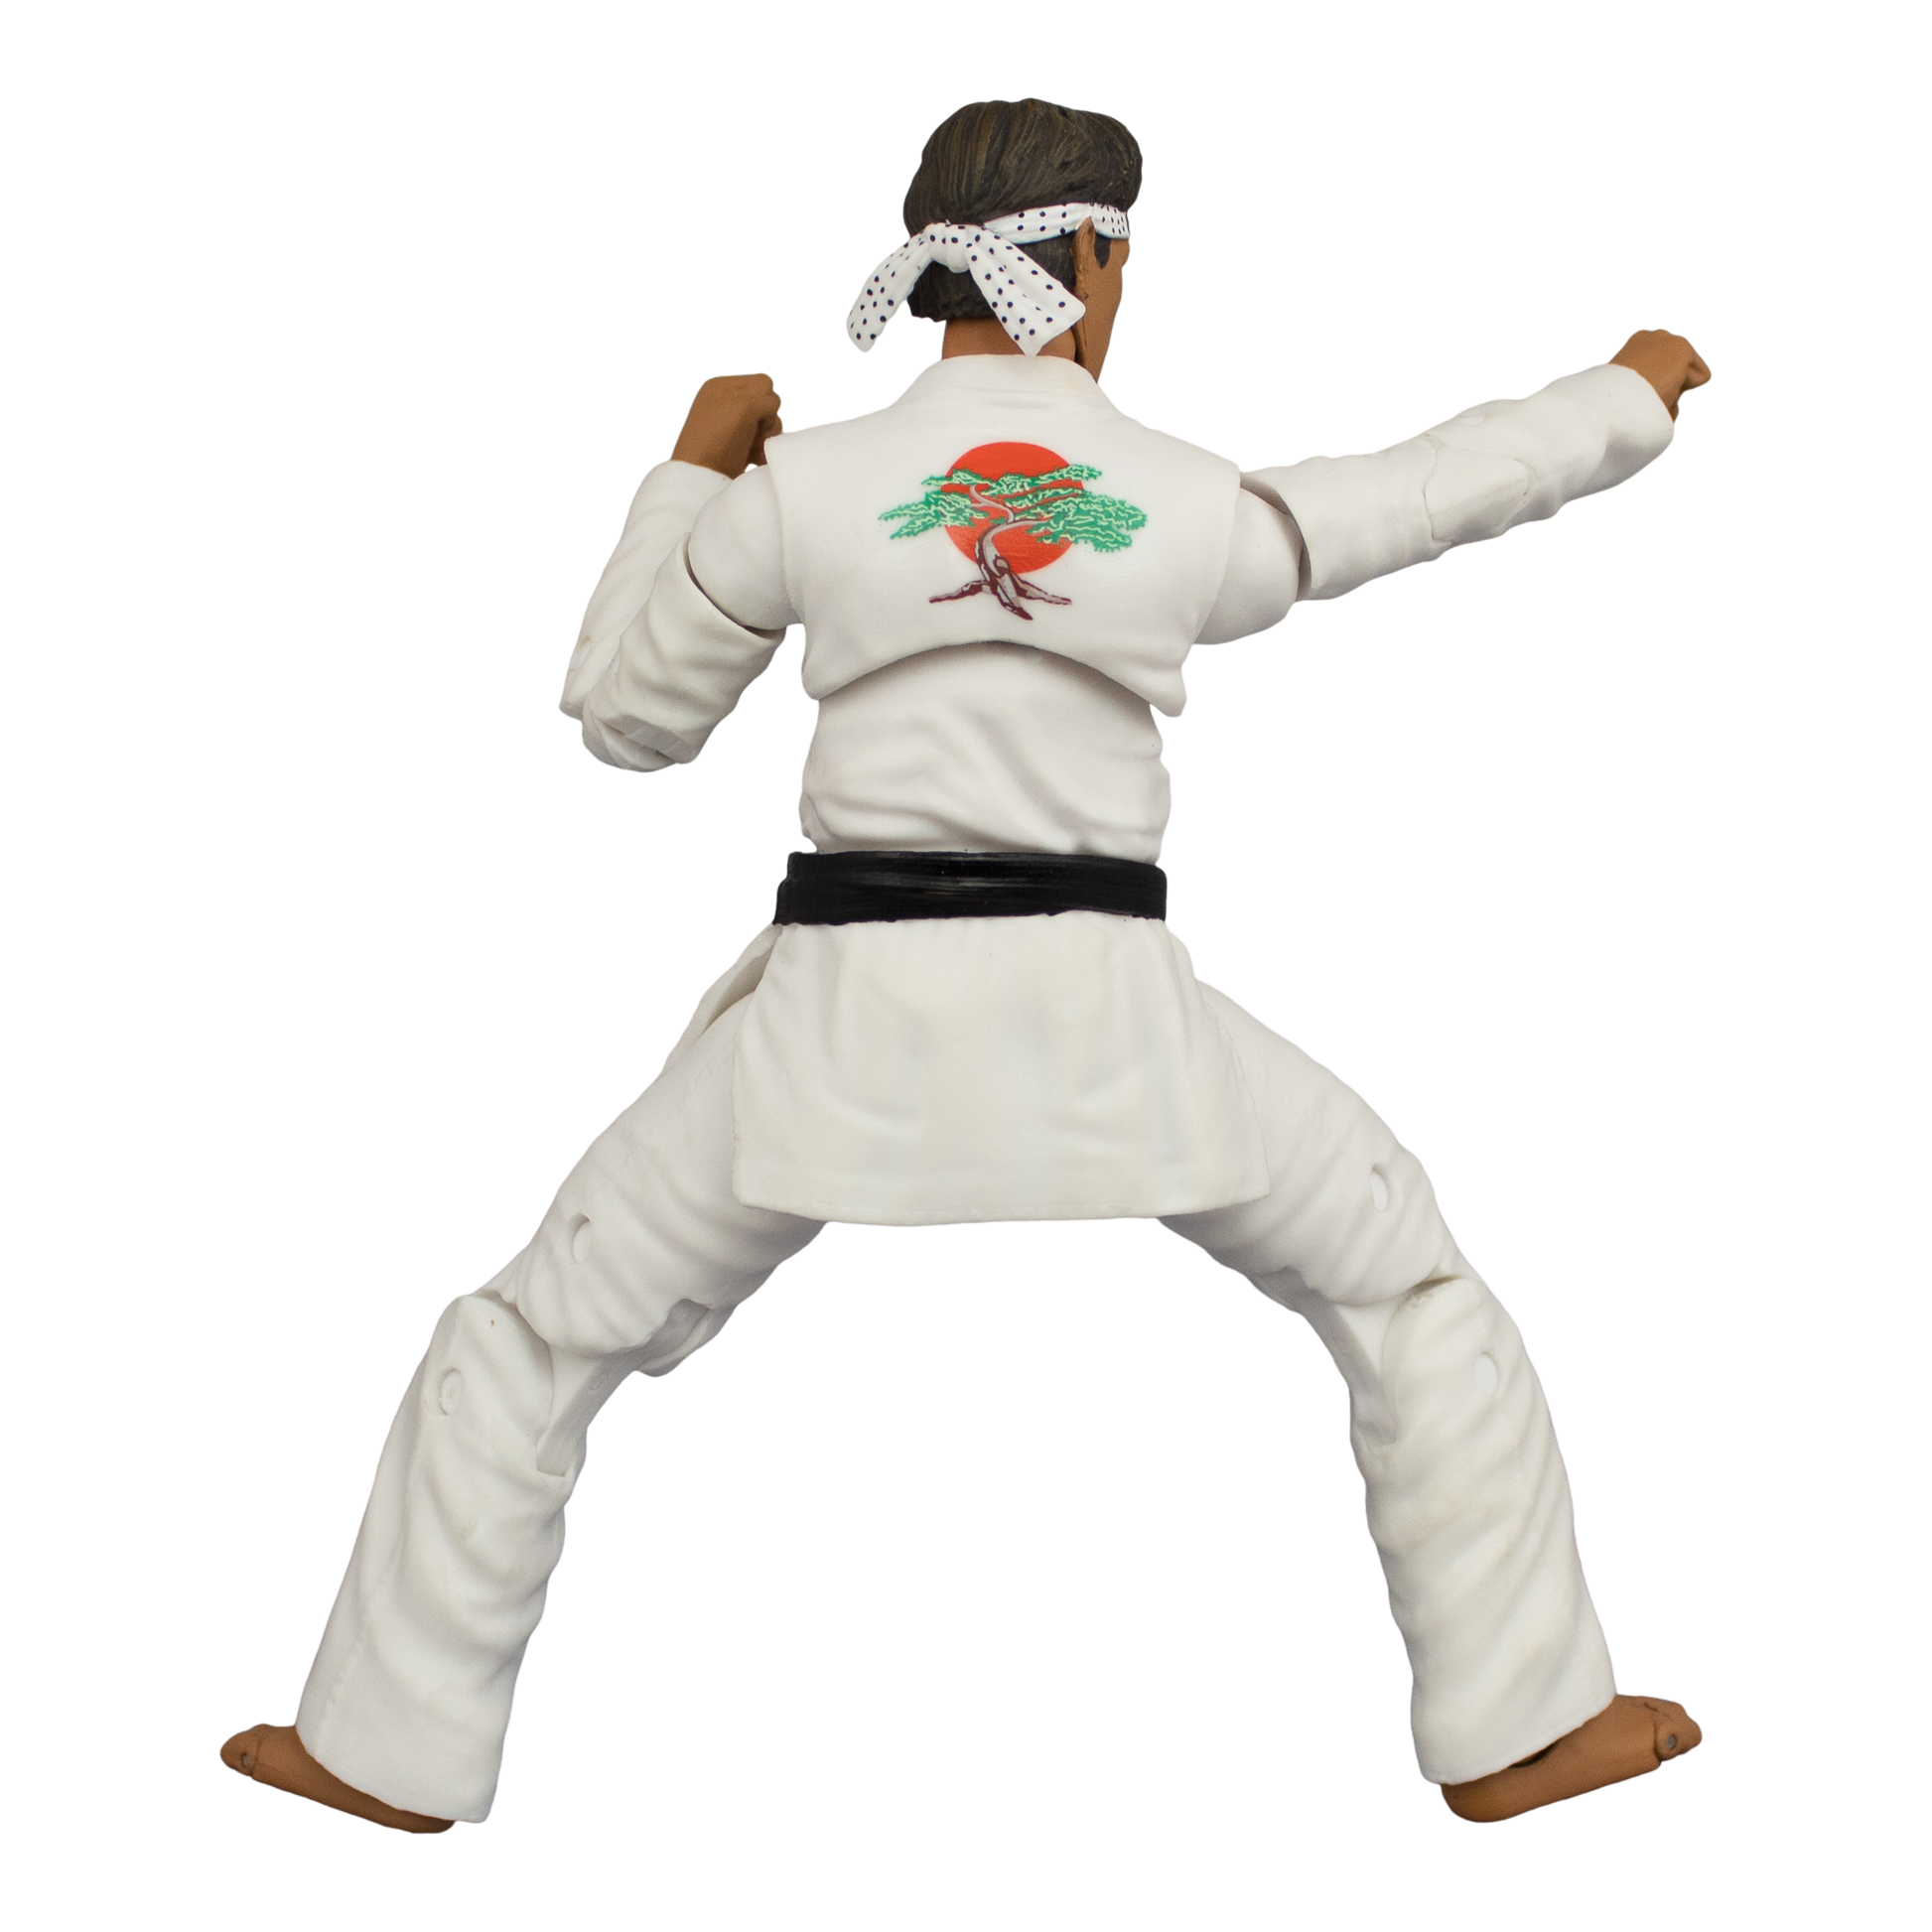 The Karate Kid Daniel Larusso Action Figure - Available 3rd Quarter 2021 - Icon Heroes 